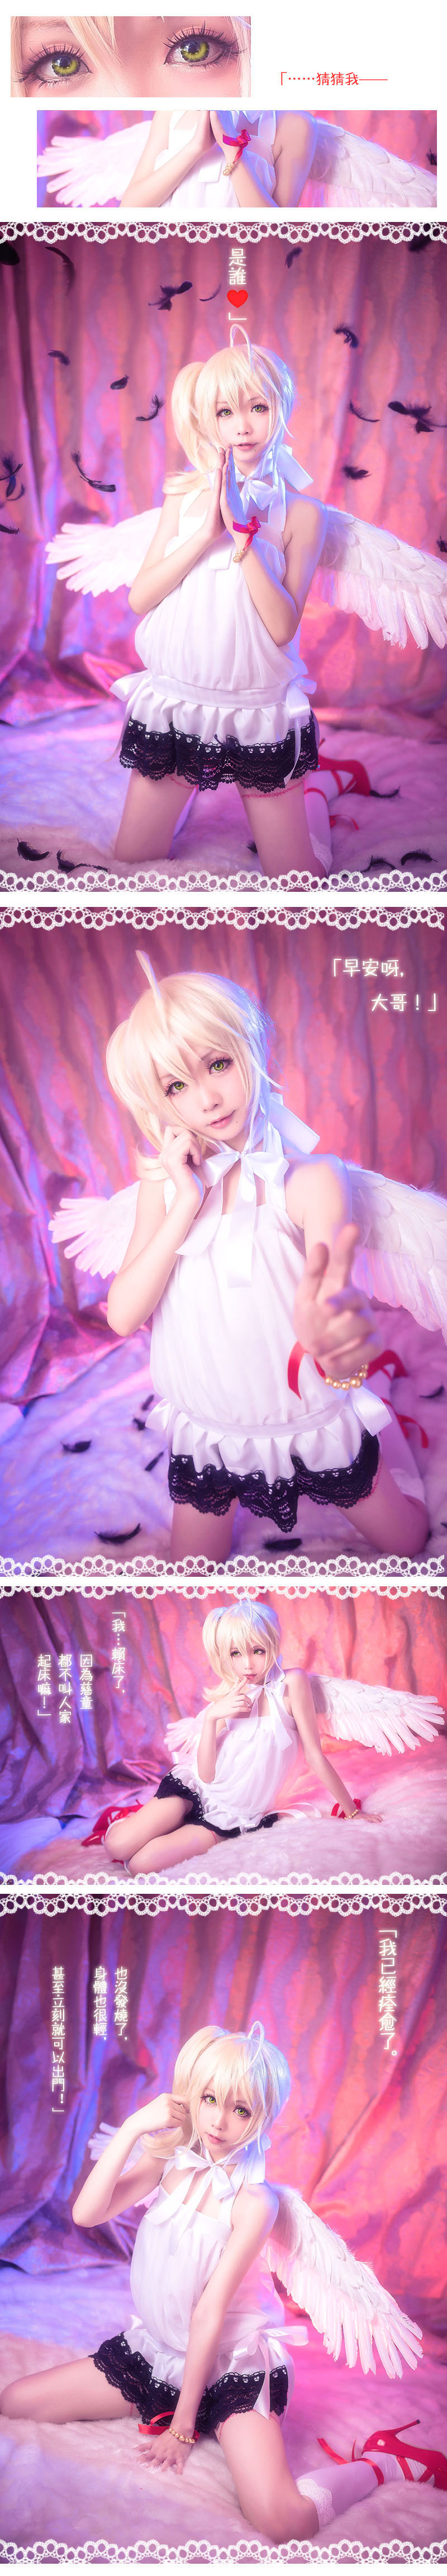 Star's Delay to December 22, Coser Hoshilly BCY Collection 8(9)